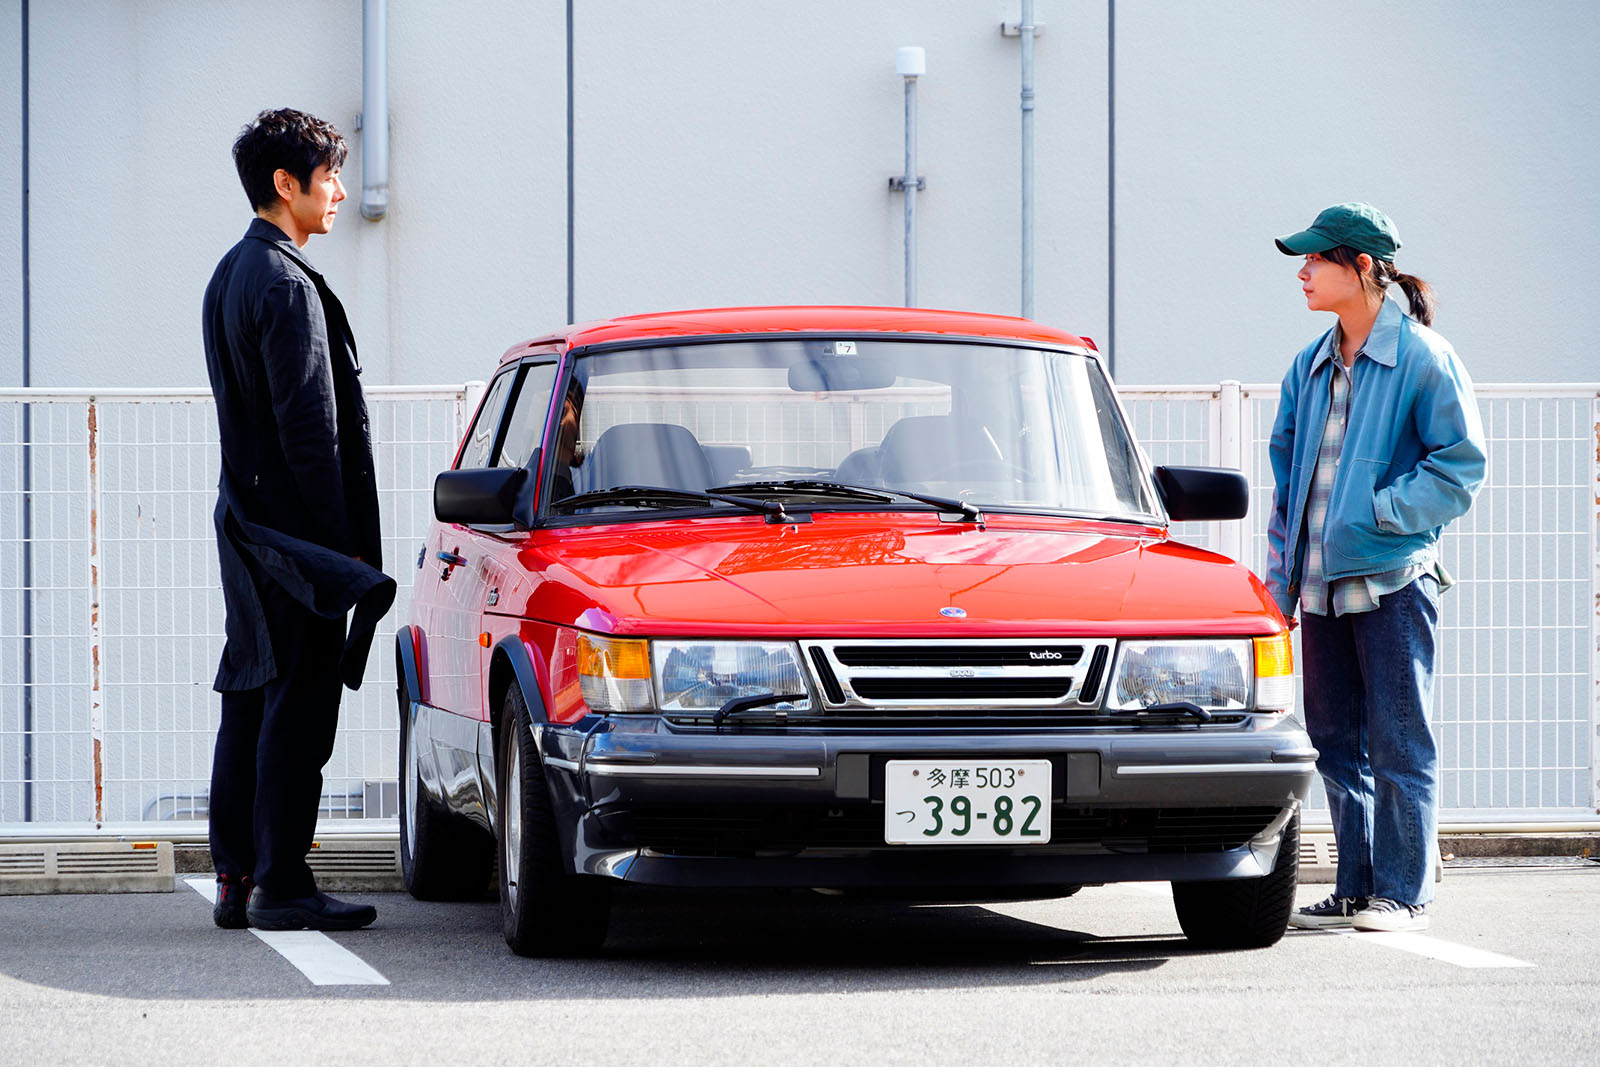 Hidetosho Nishijima (L) plays opposite Toko Miura (R) in Drive My Car. Image © Bitters End